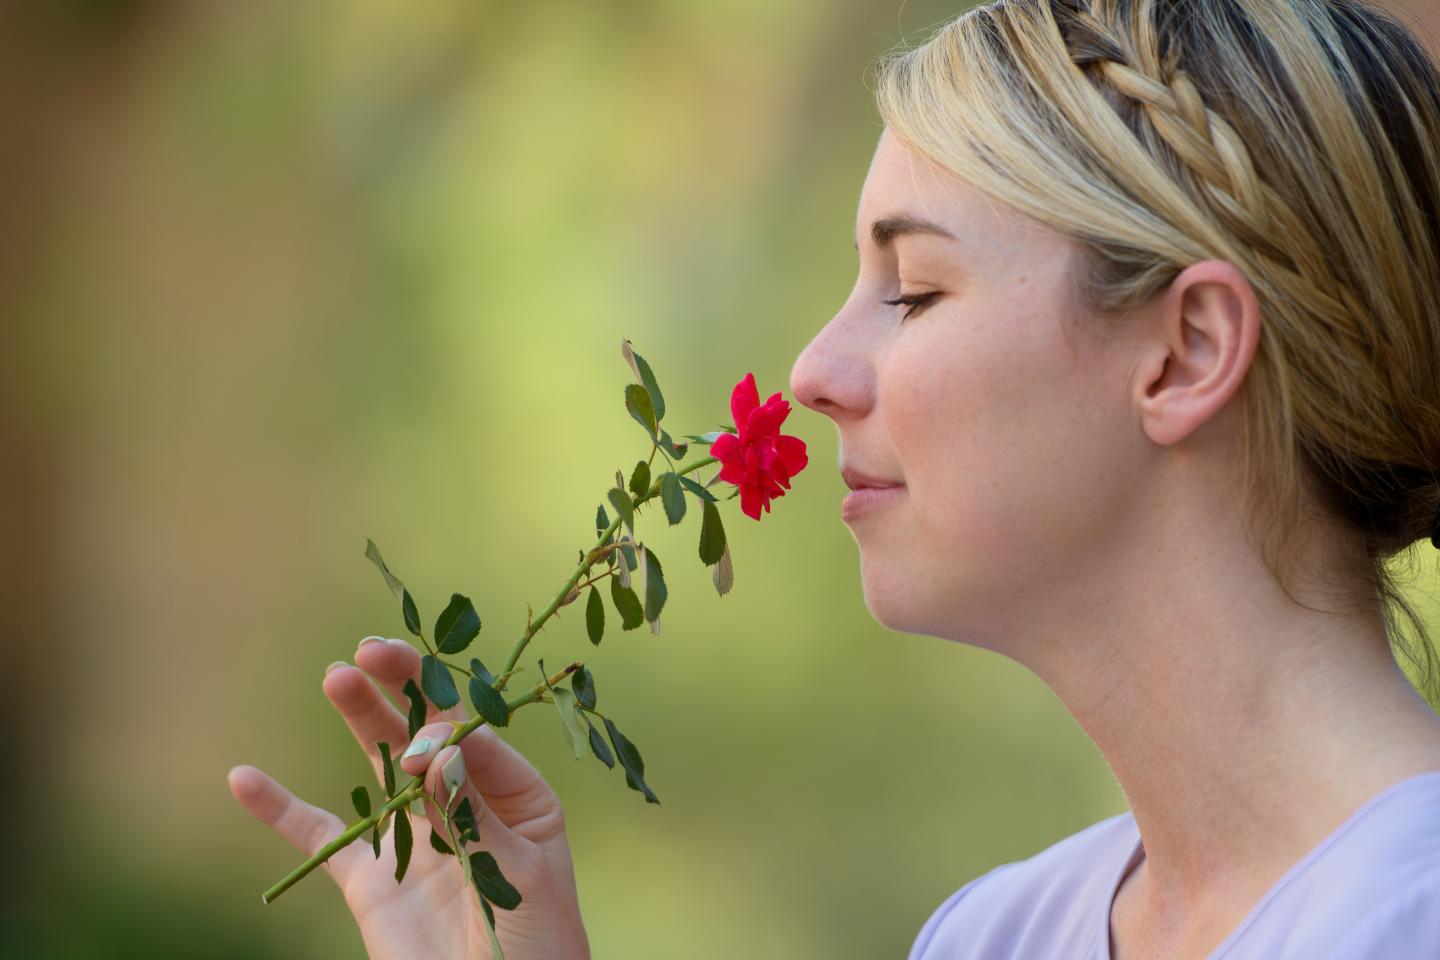 HOW OUR SENSE OF SMELL CONNECTS TO PERSONAL MEMORIES